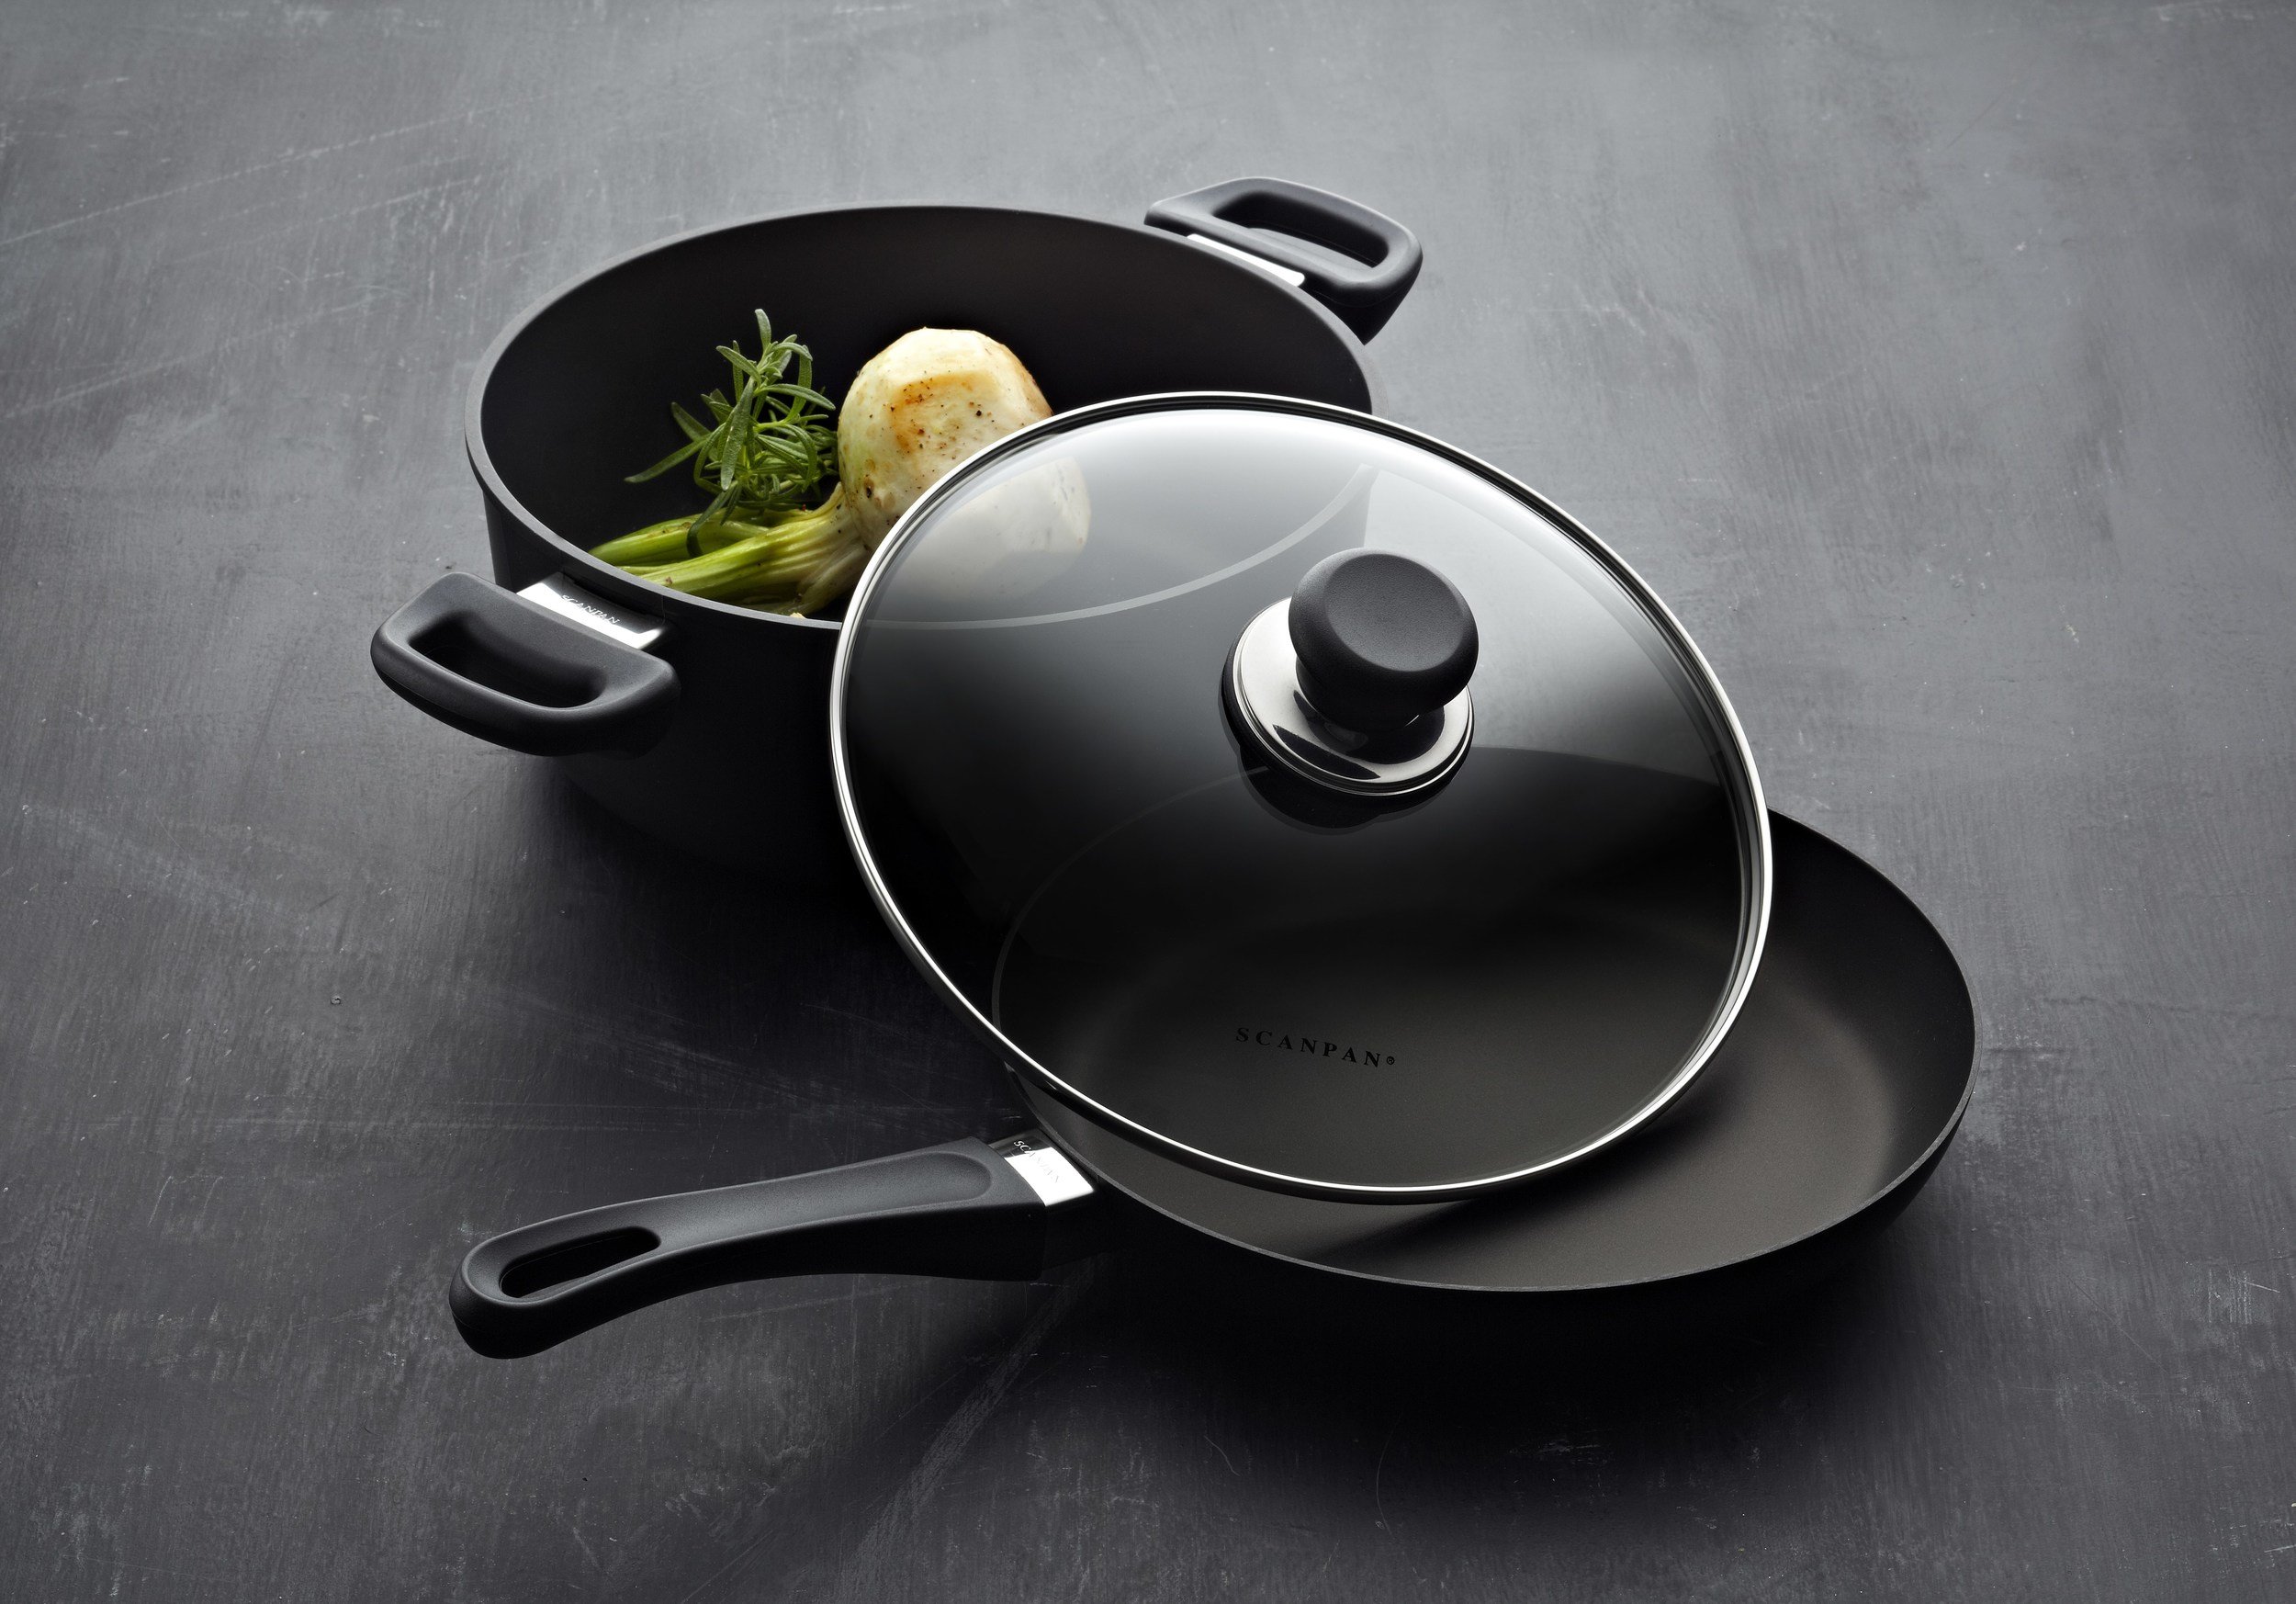 Classic Nonstick Deep Frying Pan With Lid - Cookware - Kitchen